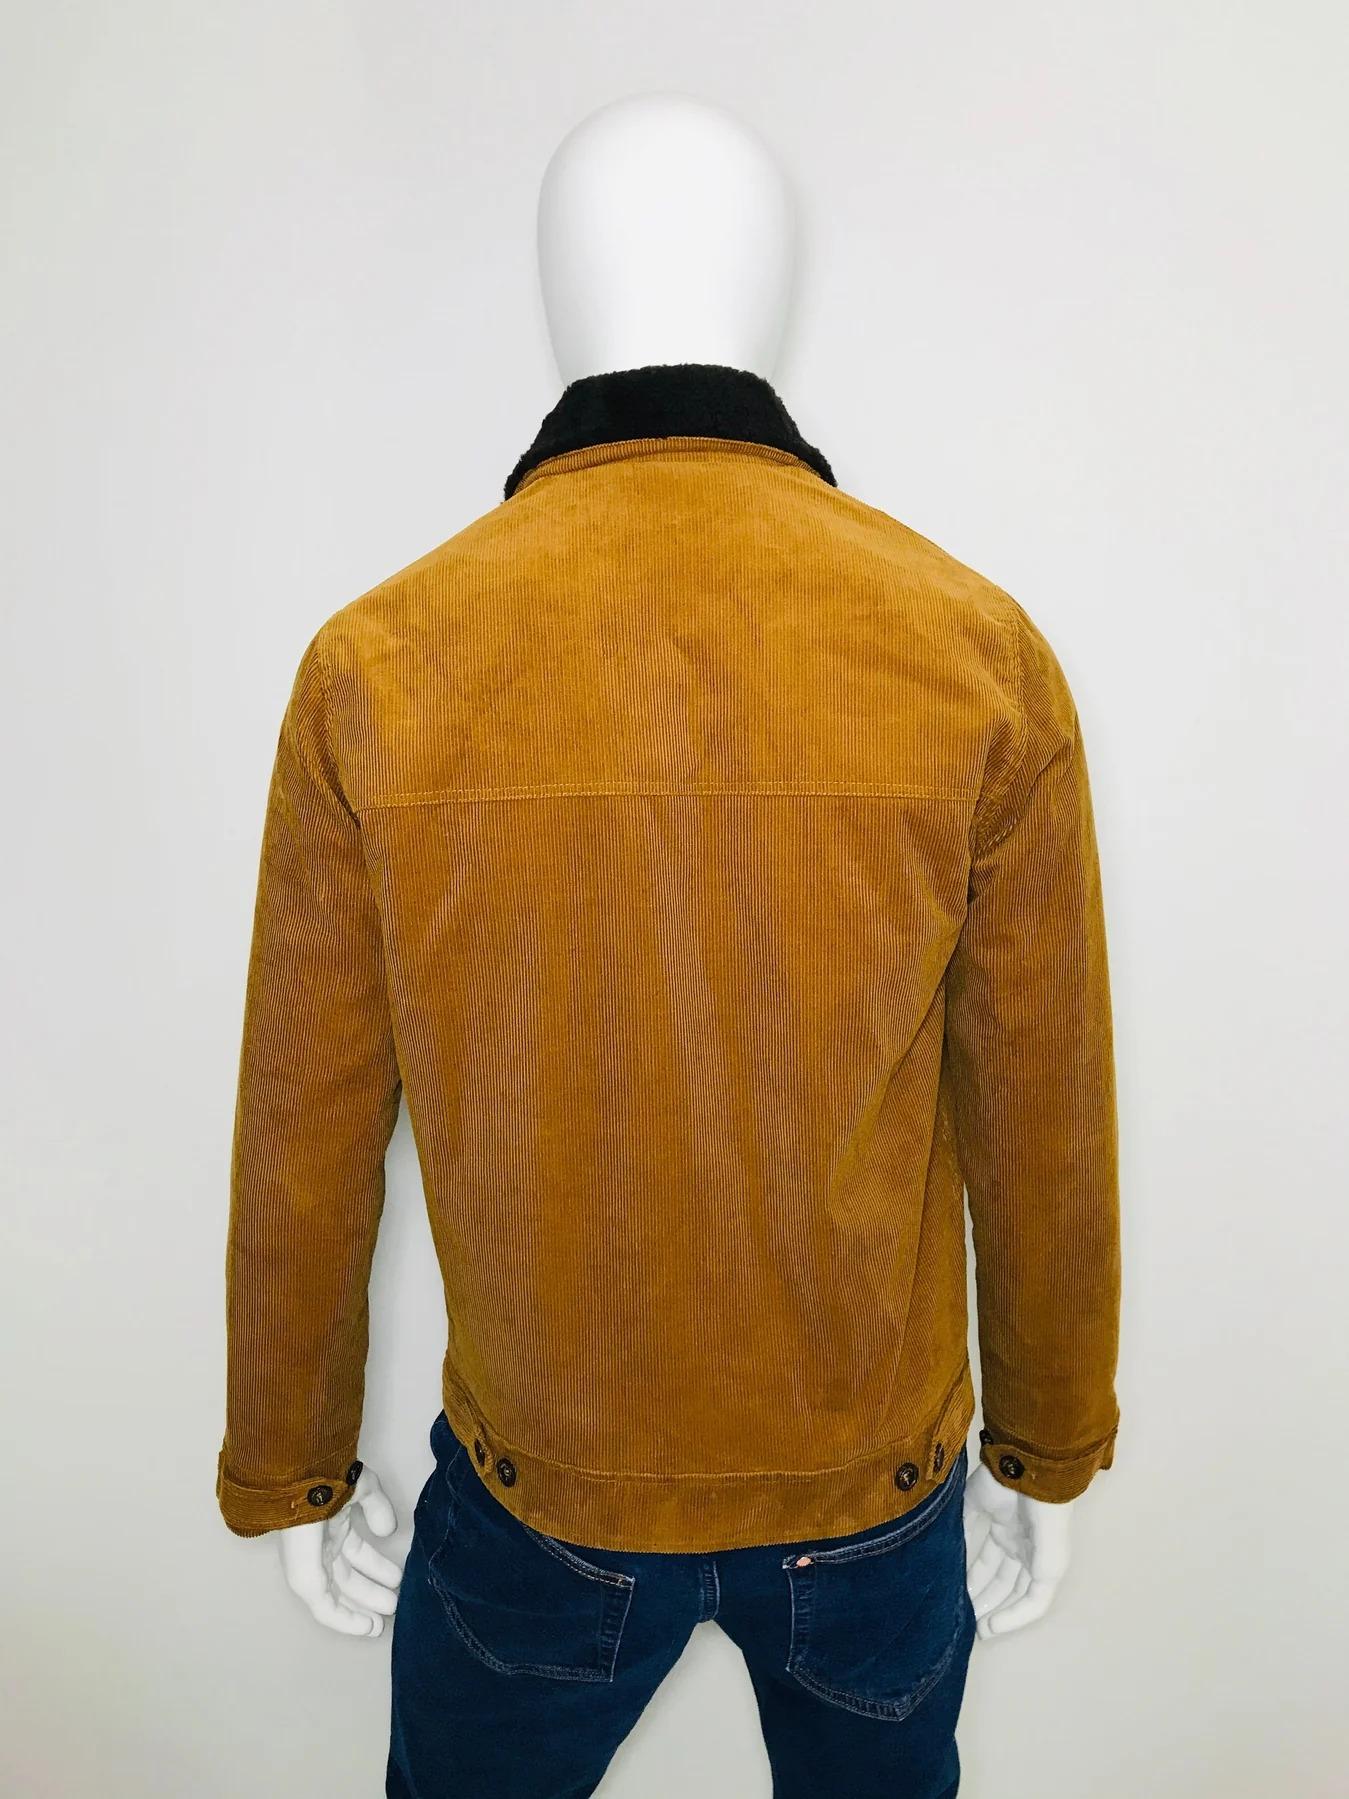 Percival Corduroy Jacket In Excellent Condition For Sale In London, GB